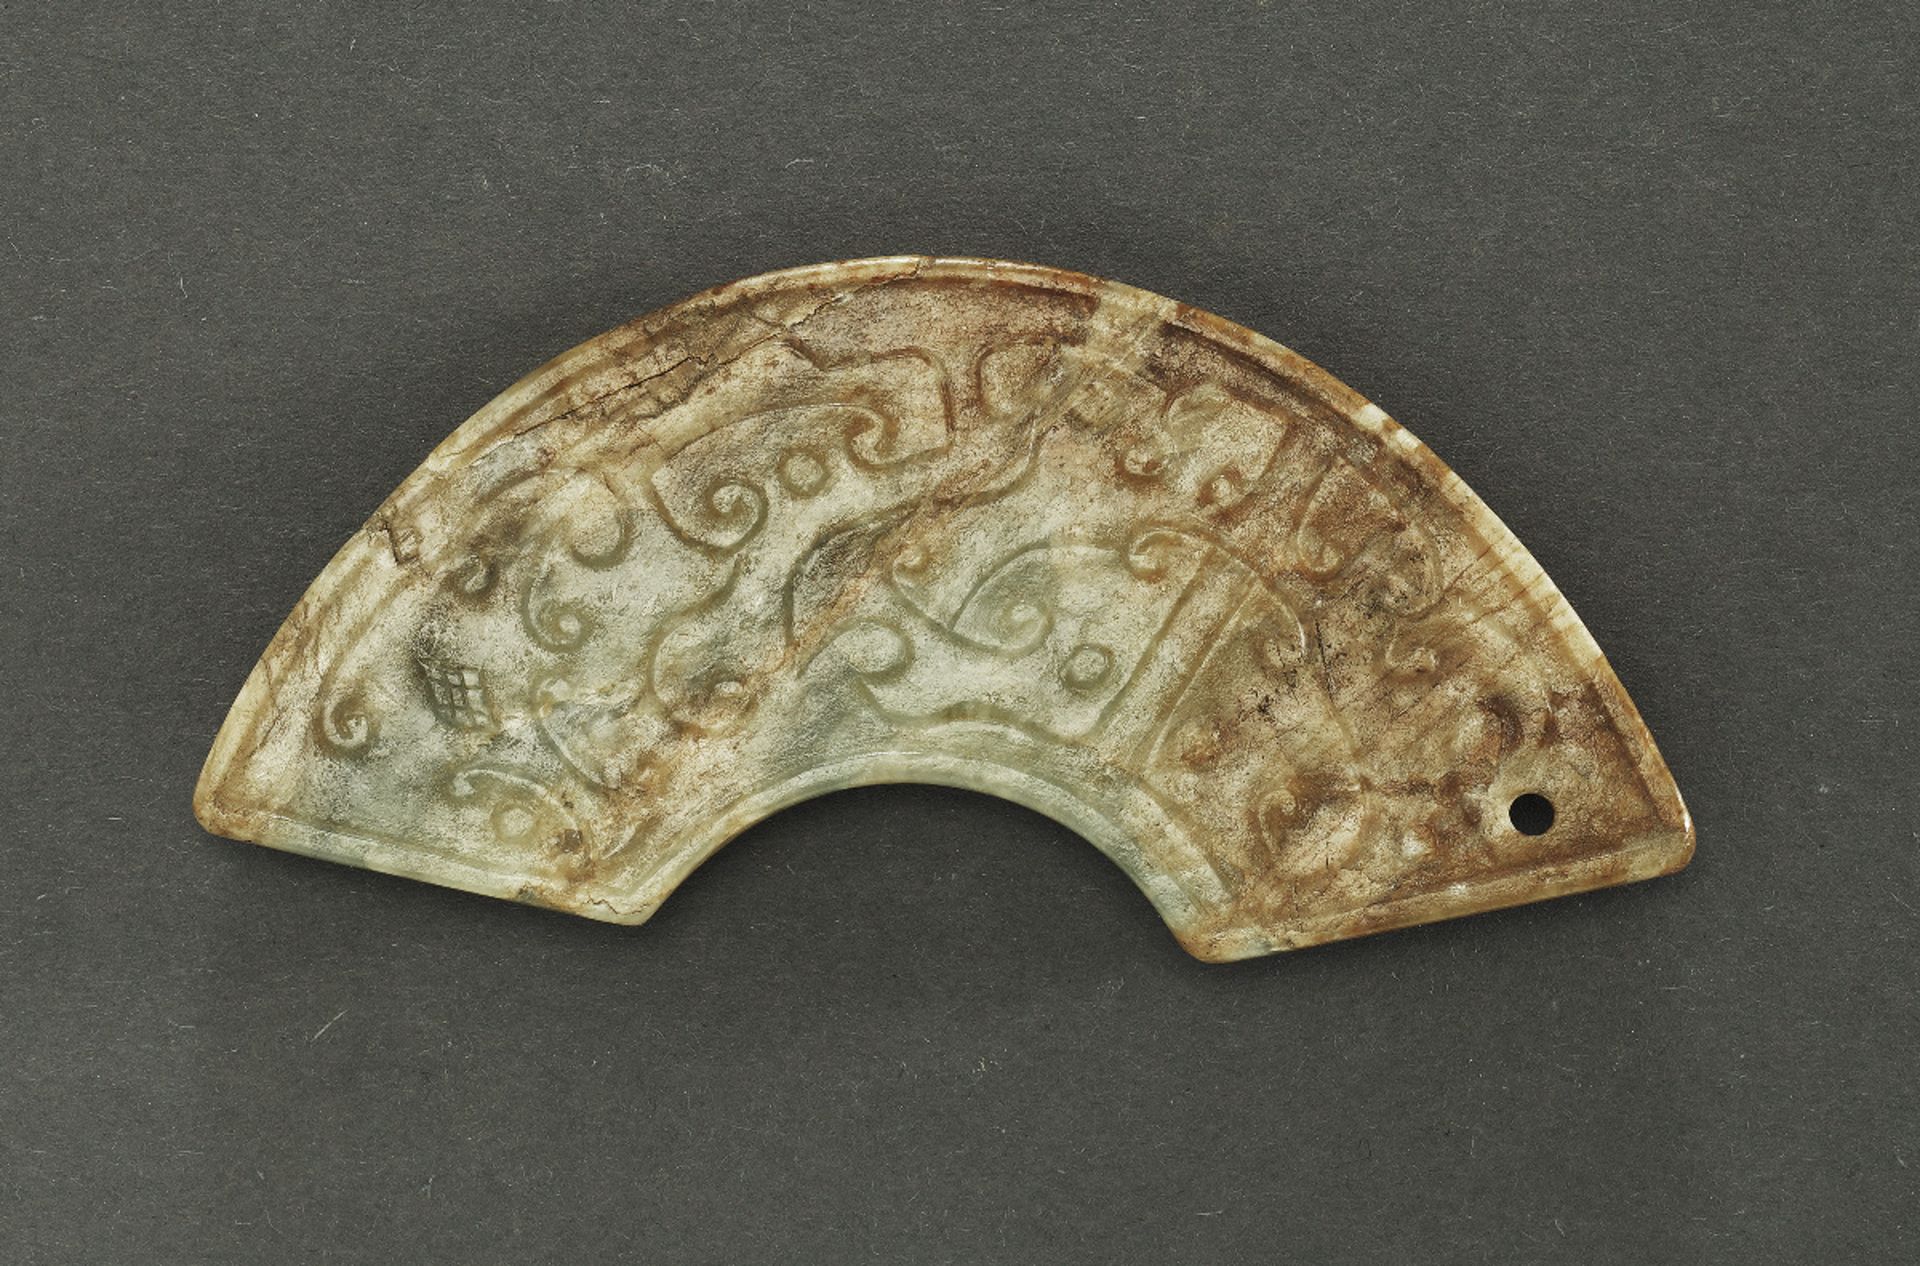 ARCHAISTIC HUANG PENDANT WITH DECORATIONIN LOW RELIEF  Jade. China, Qing Dynasty, early 19th